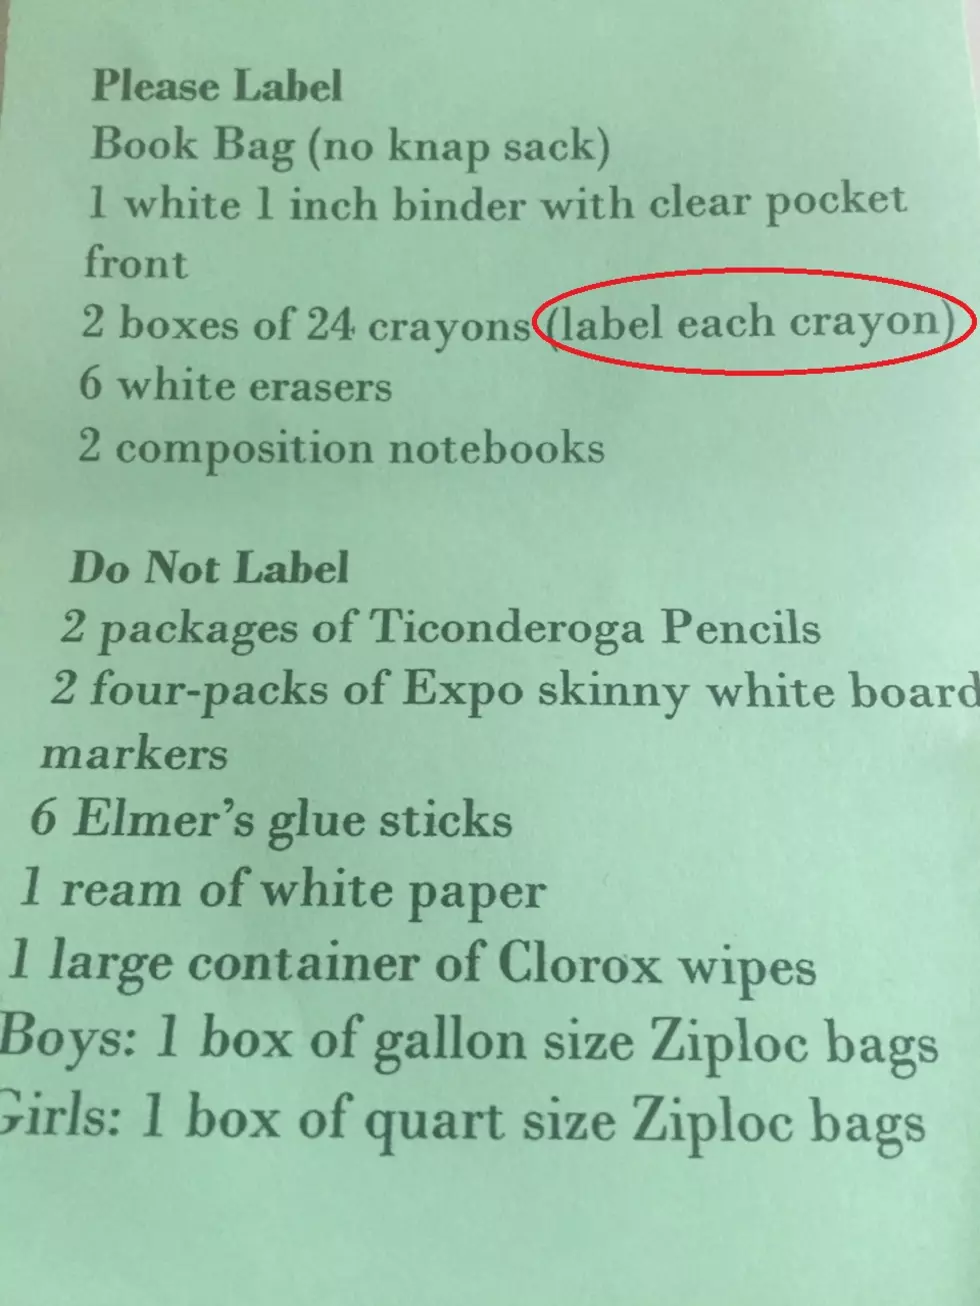 This Back to School Supply List Includes A Bizarre Request